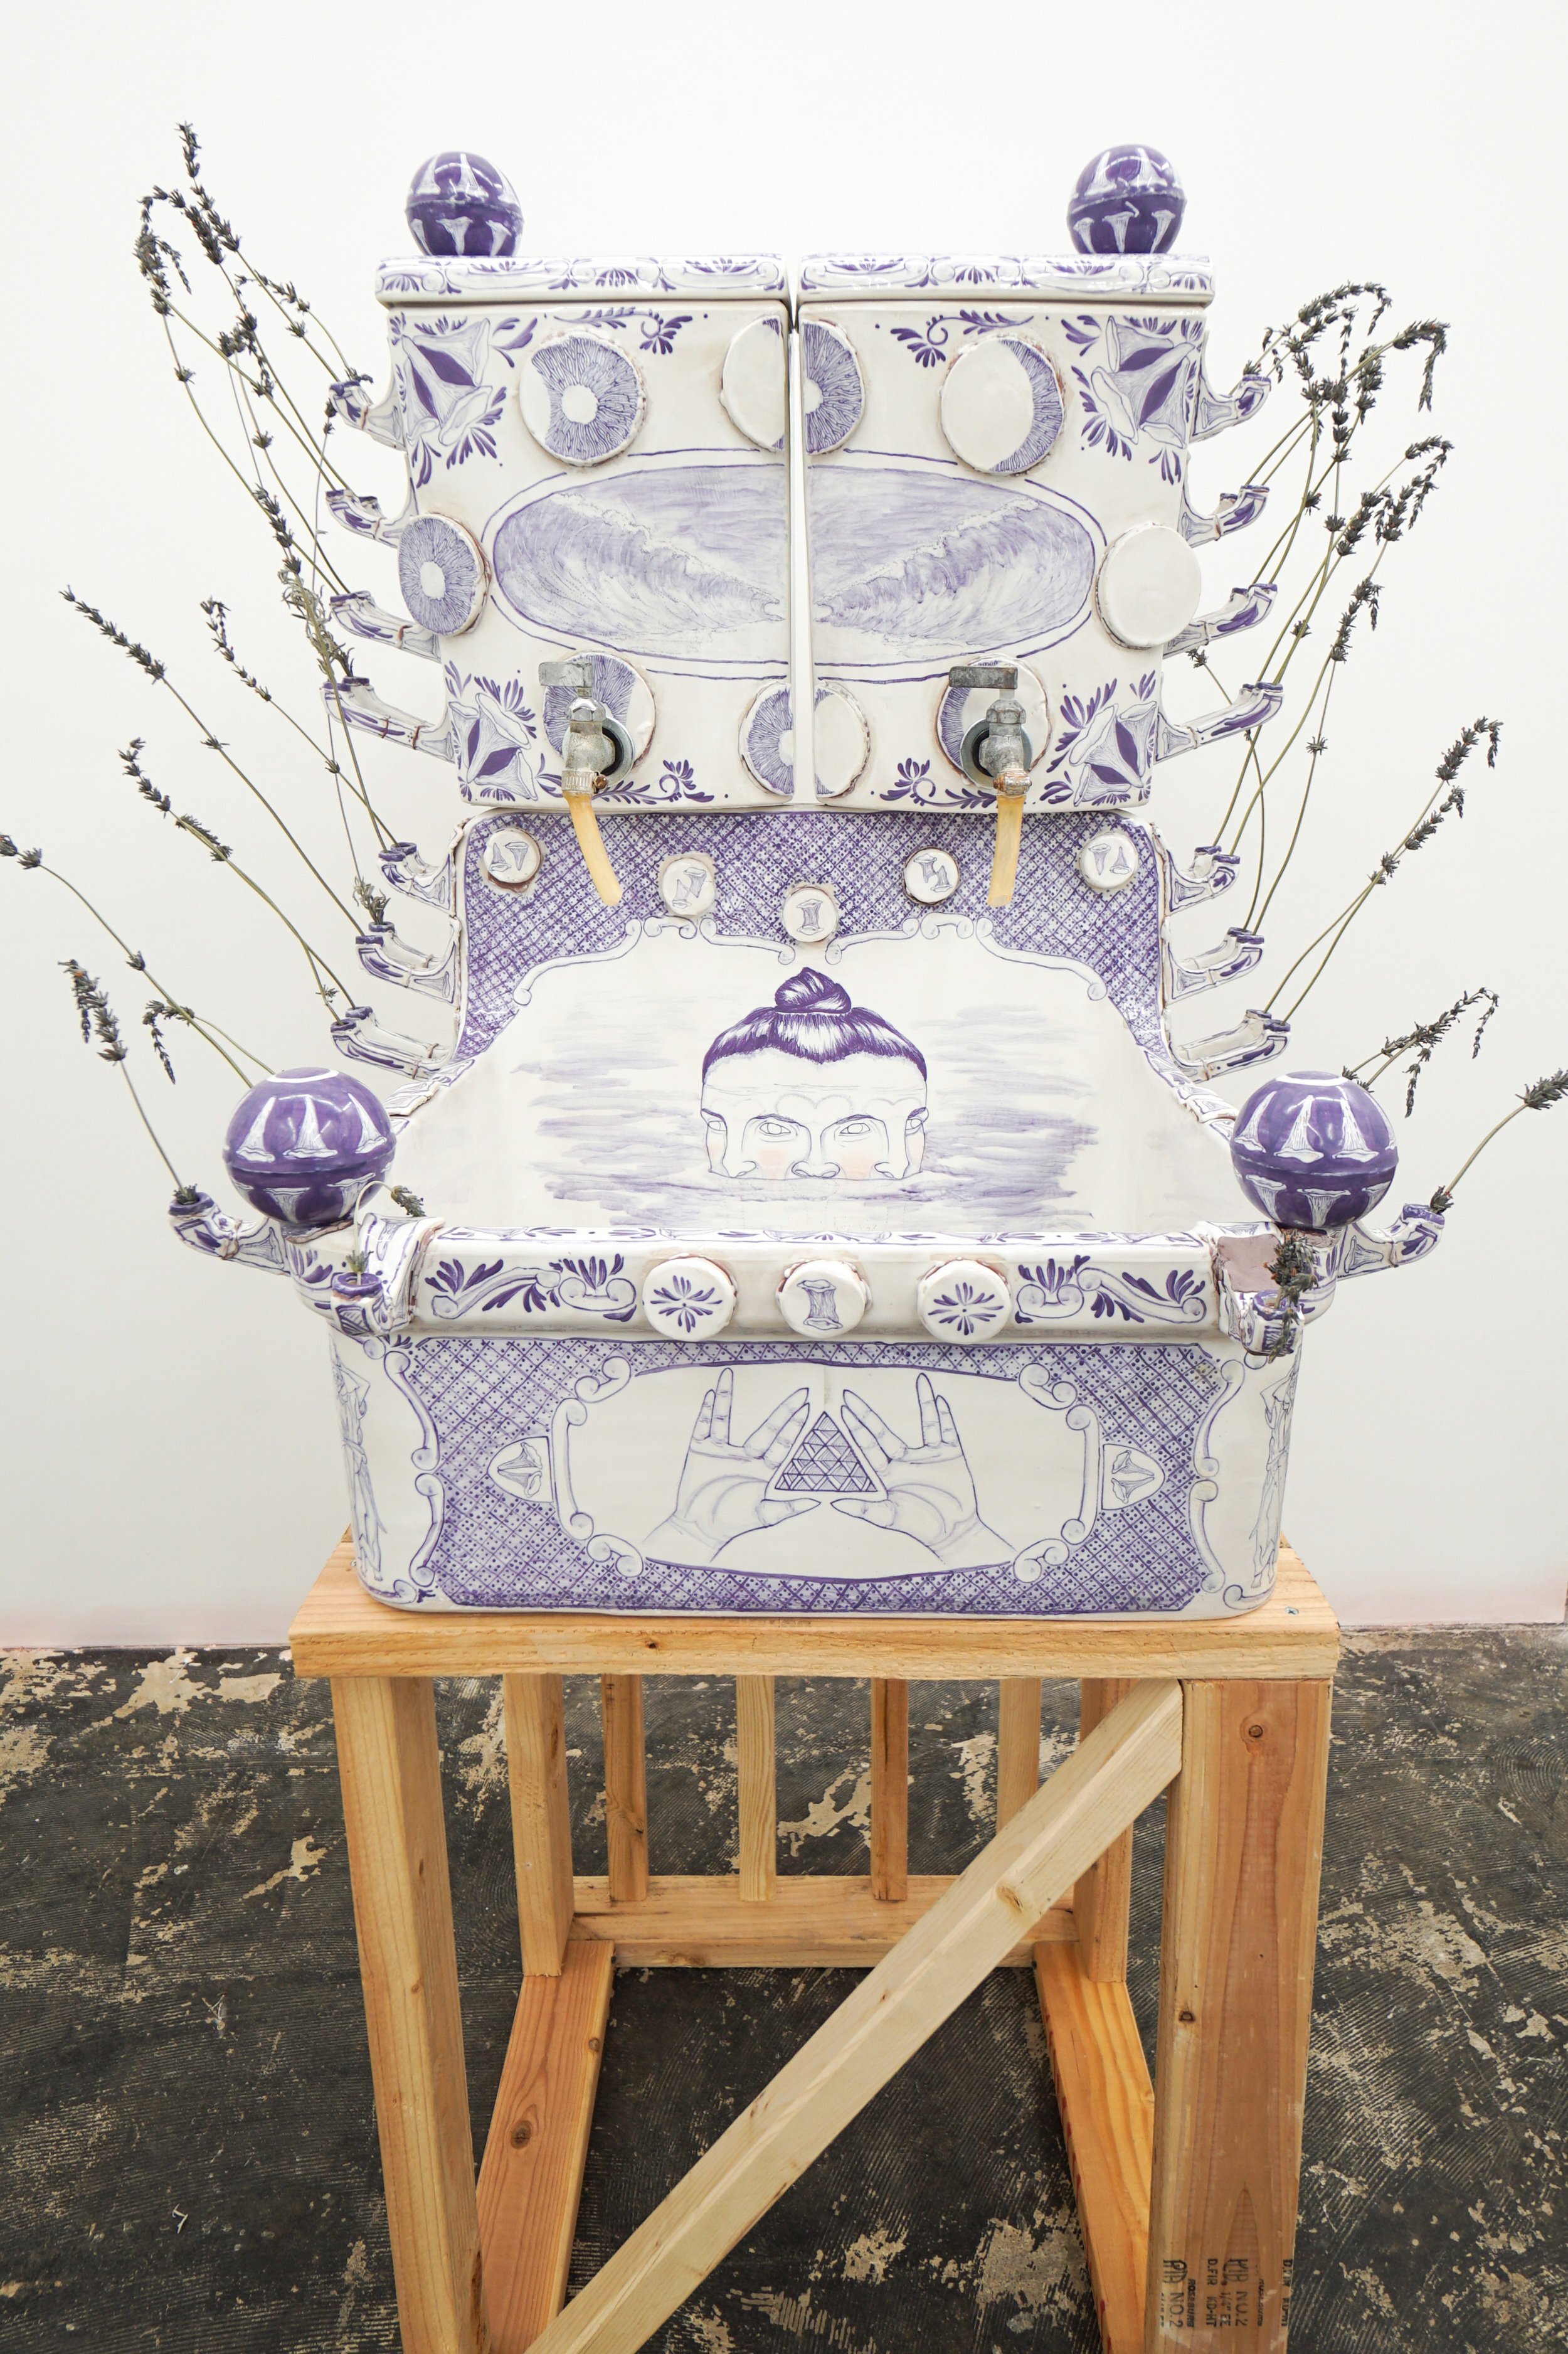  Nicki Green   Splitting/Unifying (toilet tanks, slip spigots, and medical sink laver with faucets) , 2019  Glazed vitreous china with epoxy and found slip spigots  54 x 40 x 36 inches 